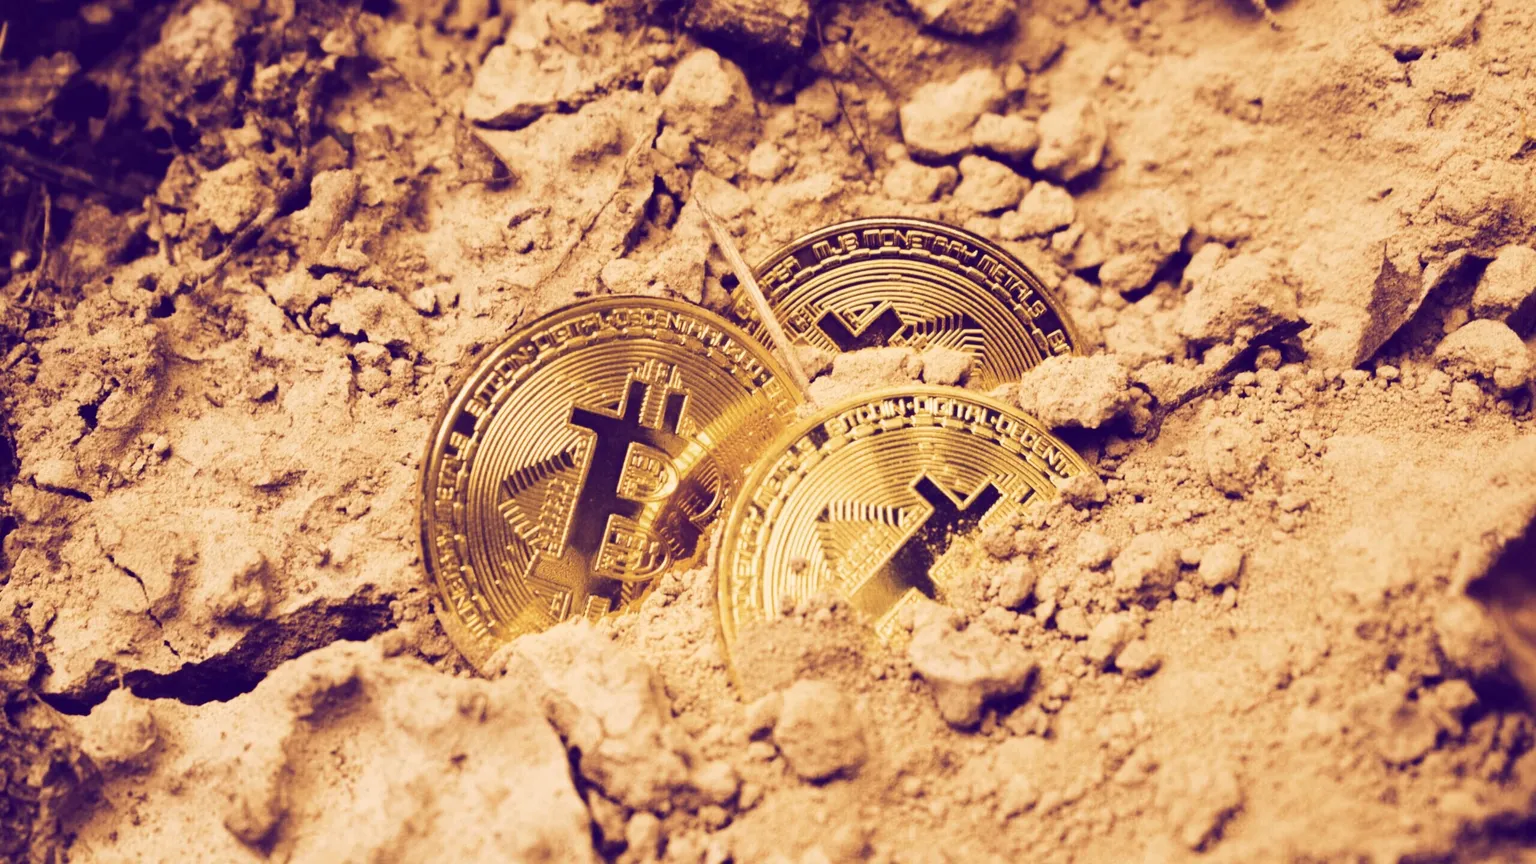 Bitcoin mining powers the network. Image: Shutterstock